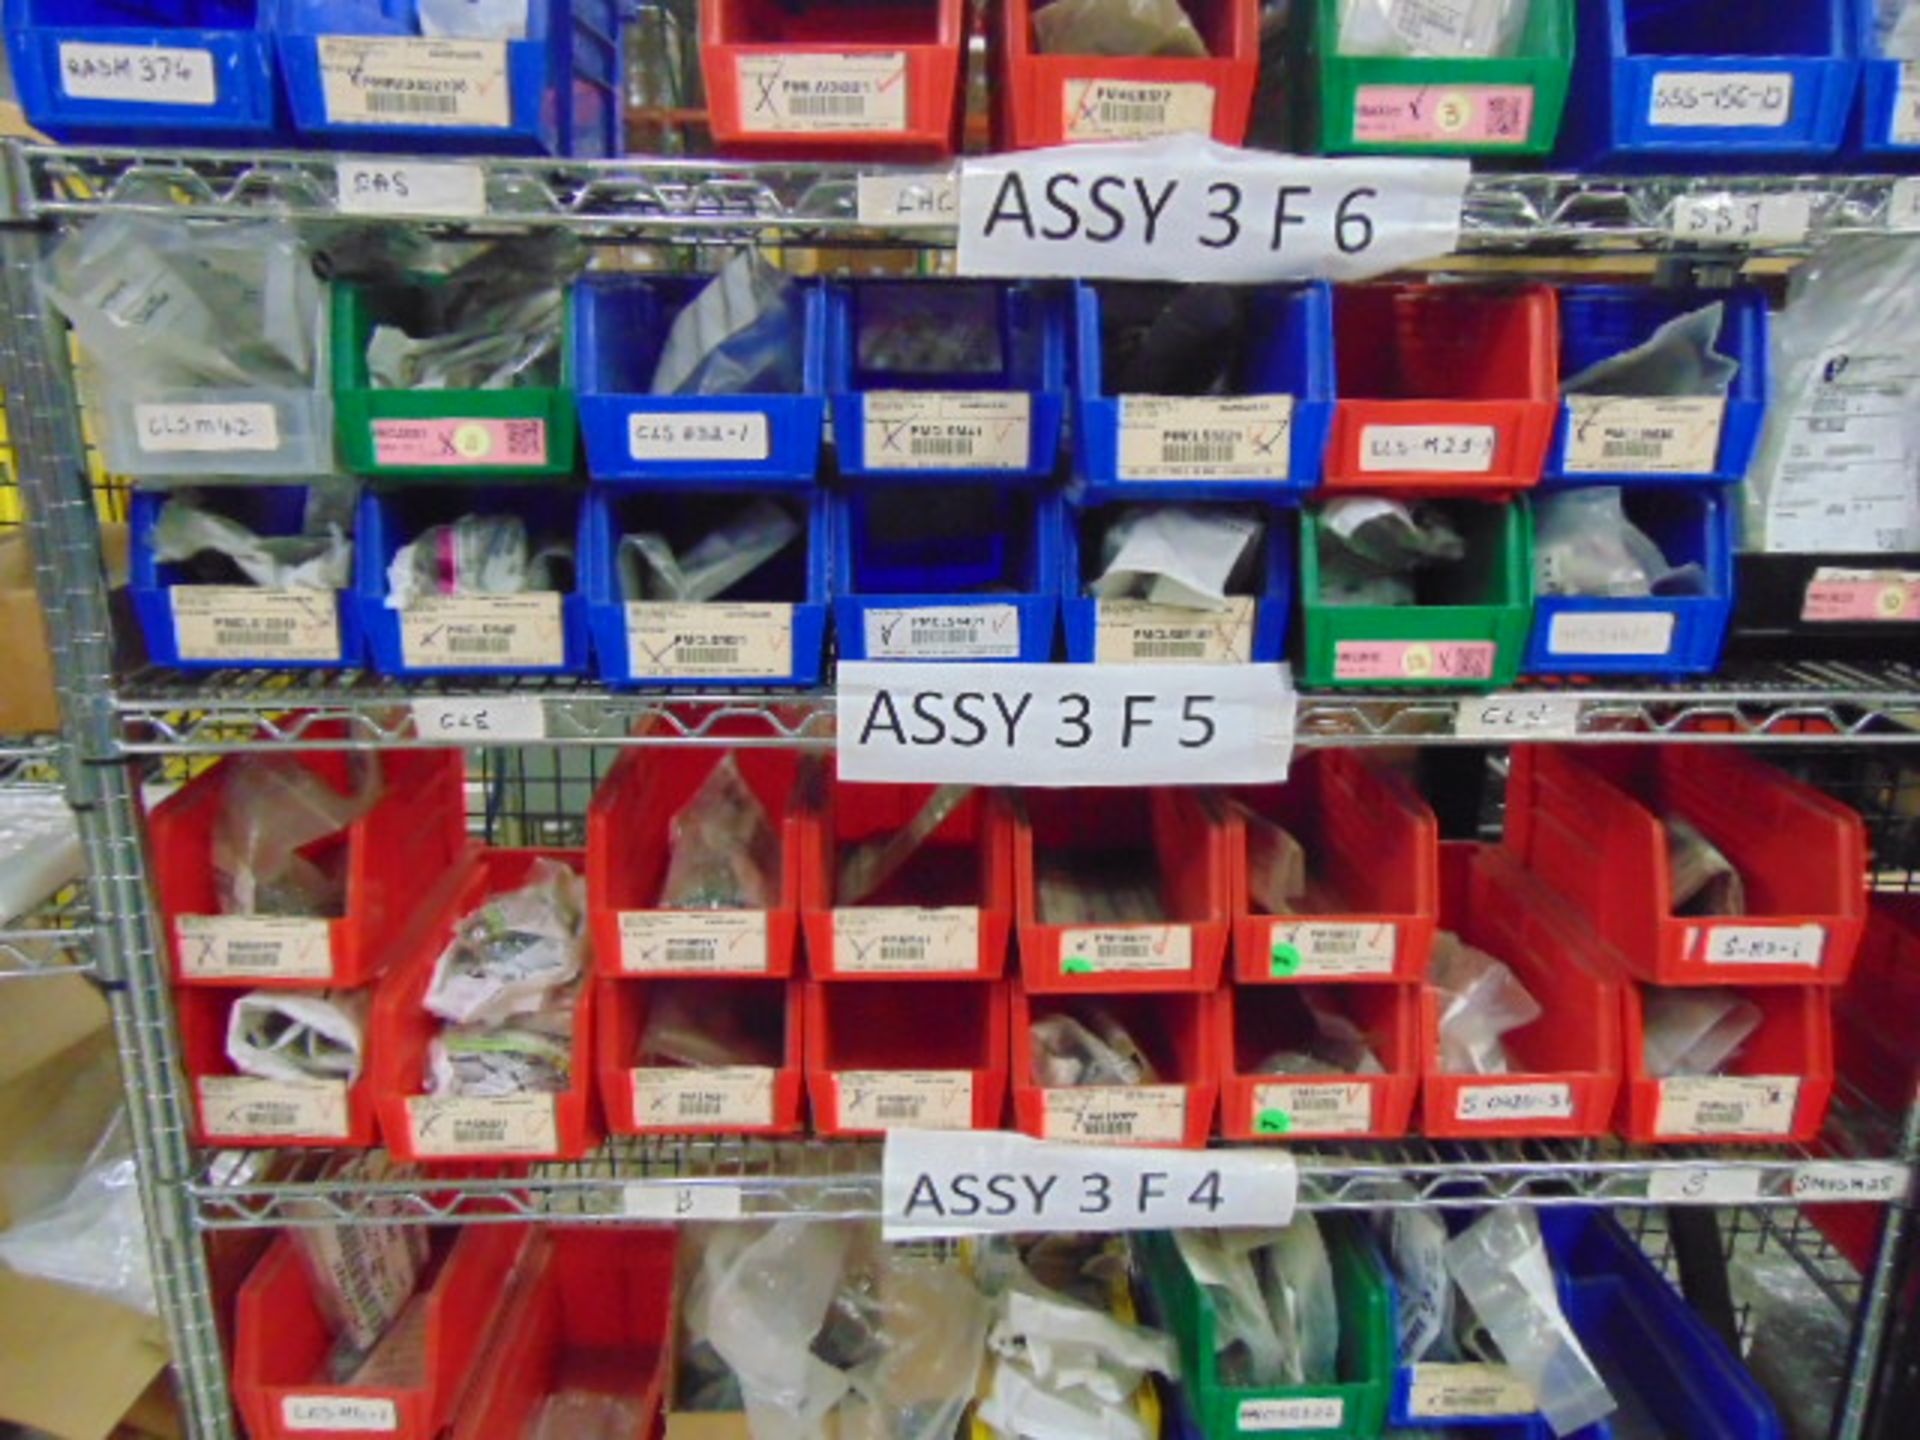 LOT CONSISTING OF: assorted fasteners, plastic bags & misc., w/ (7) assorted racks - Image 2 of 14